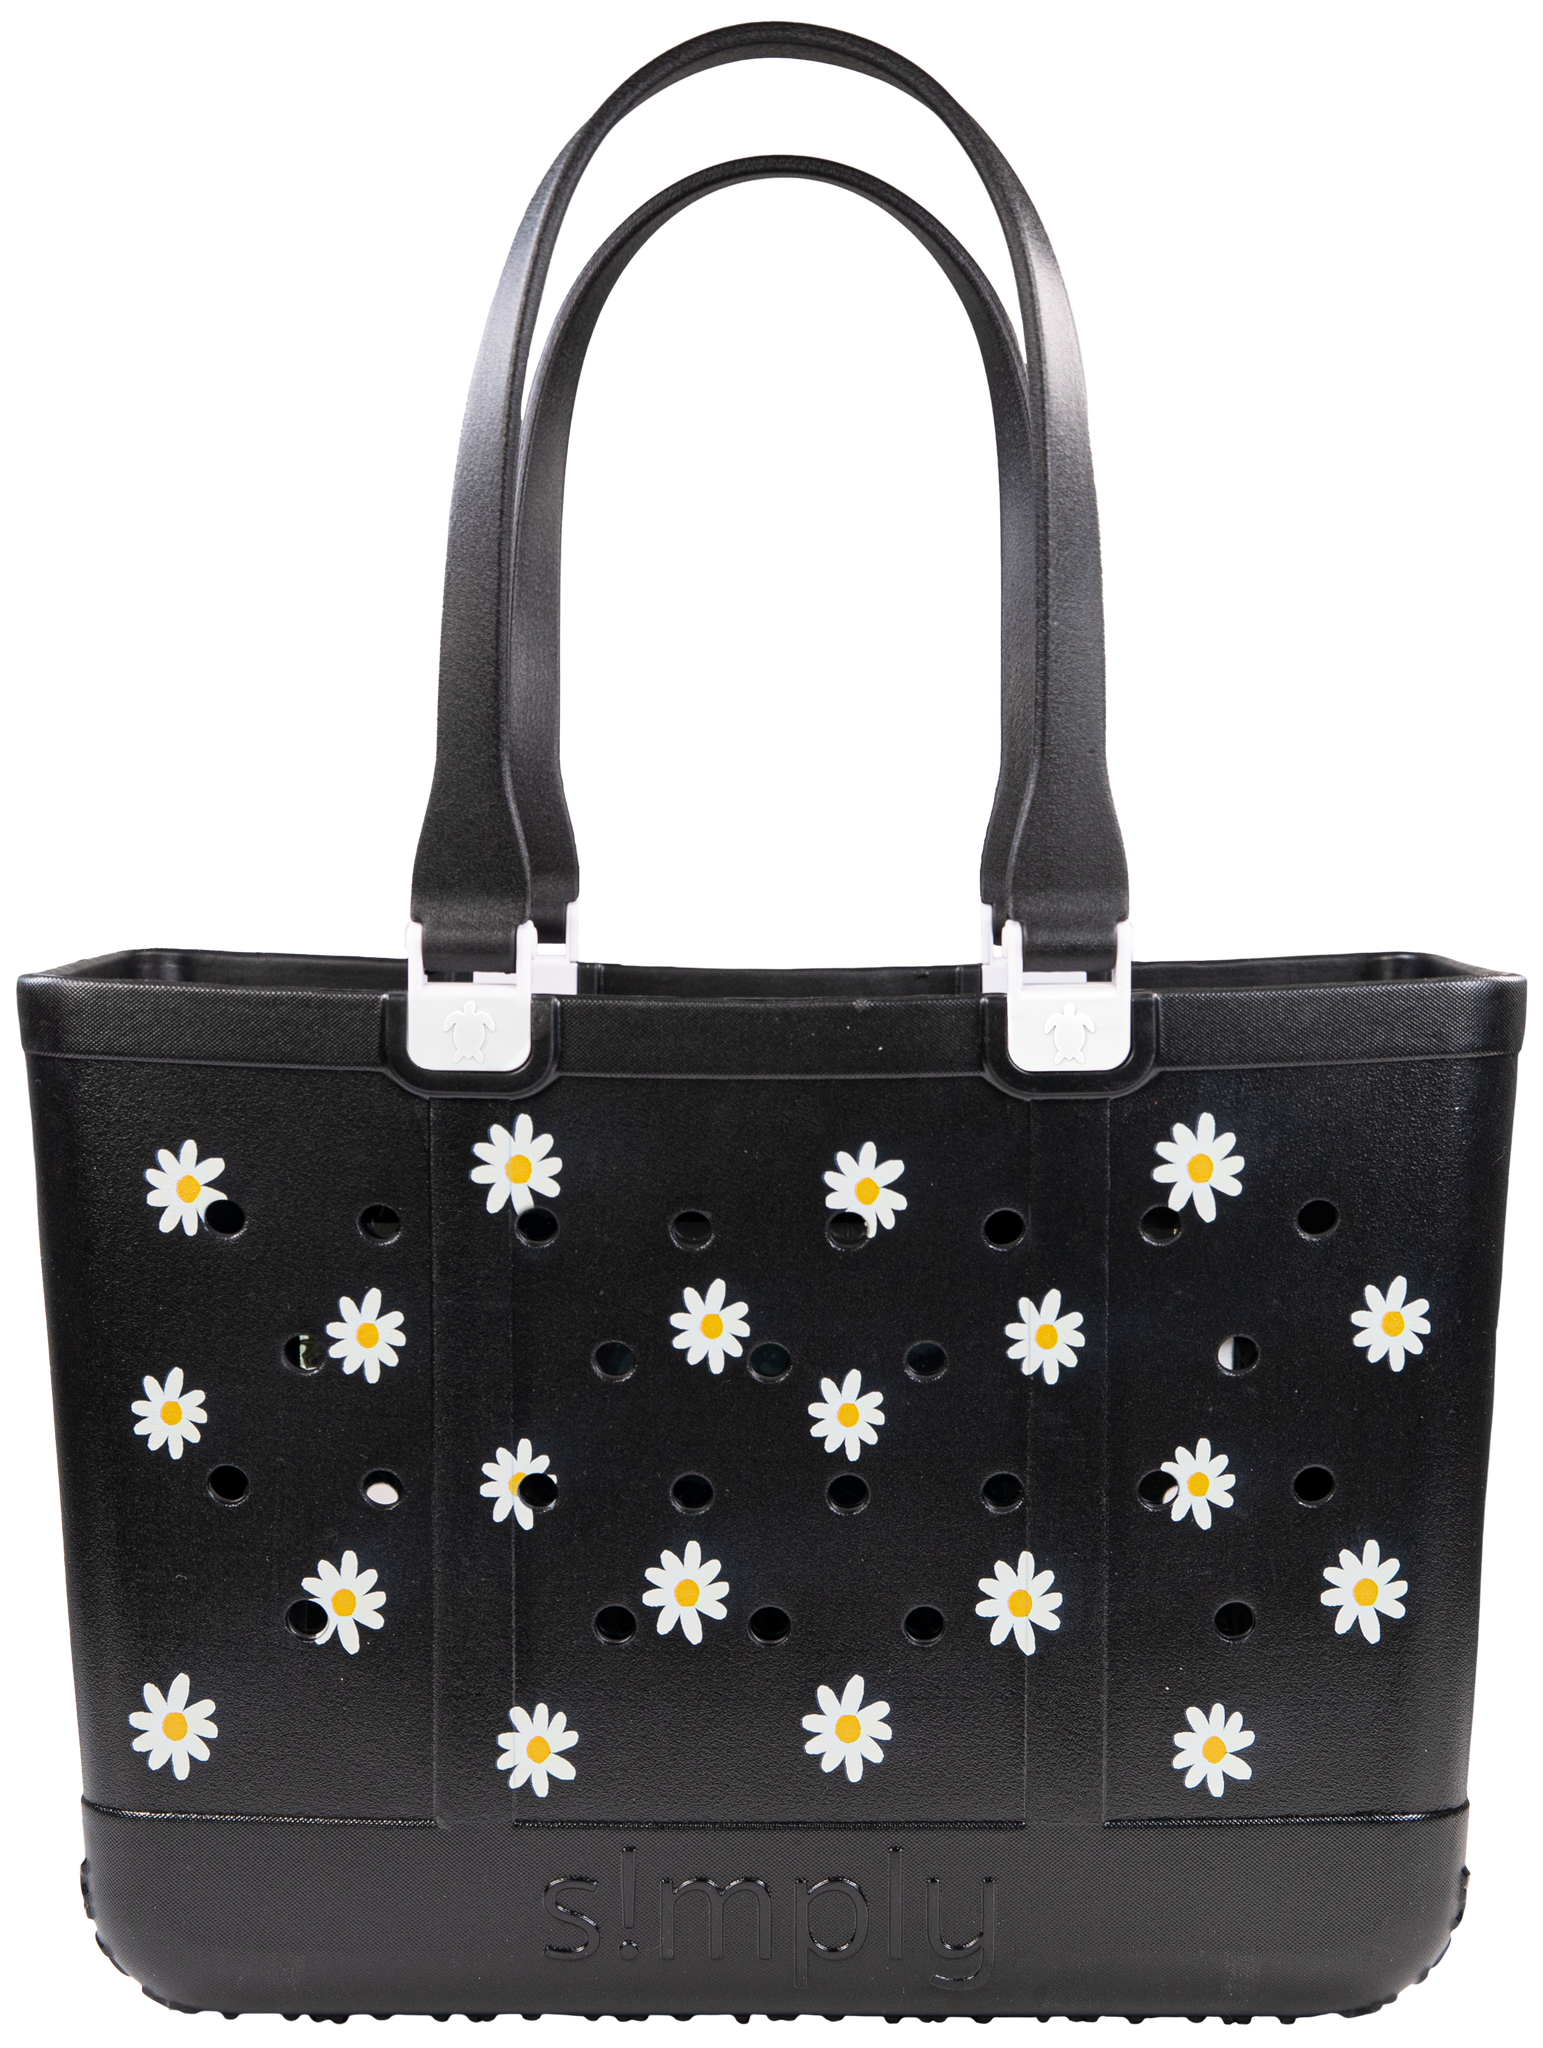 Copy of Copy of Simply Southern Tote - Iris Lg - Miche Designs and